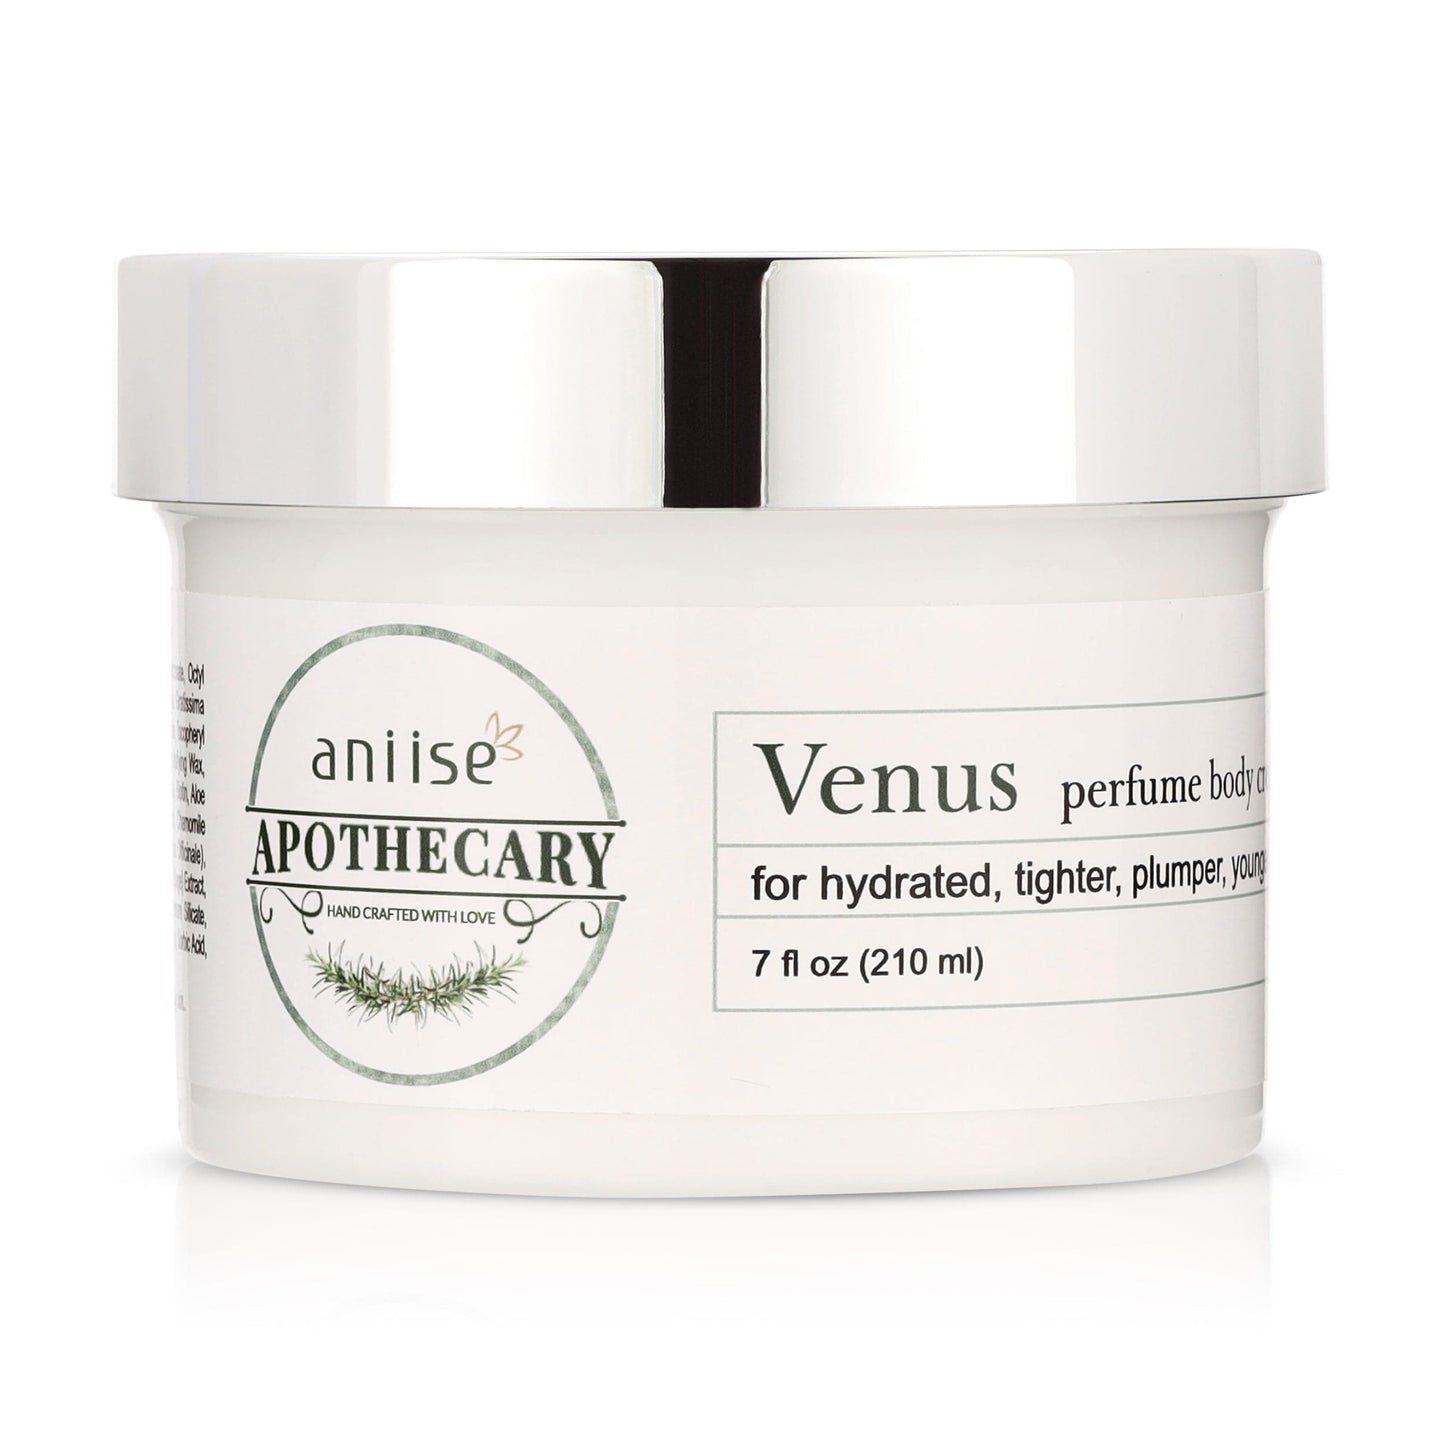  Indulge in the luxurious Apothecary Venus Perfume Body Cream and experience the ultimate pampering for your skin. This 7 fl oz cream not only moisturizes your entire body, but also leaves a tantalizing scent that will awaken your senses. Say goodbye to irritation from waxing, shaving, or dryness with its soothing properties. Inspired by AVENTUS, its dry woods scent with hints of citrus and fruit will leave you feeling refreshed and rejuvenated. 